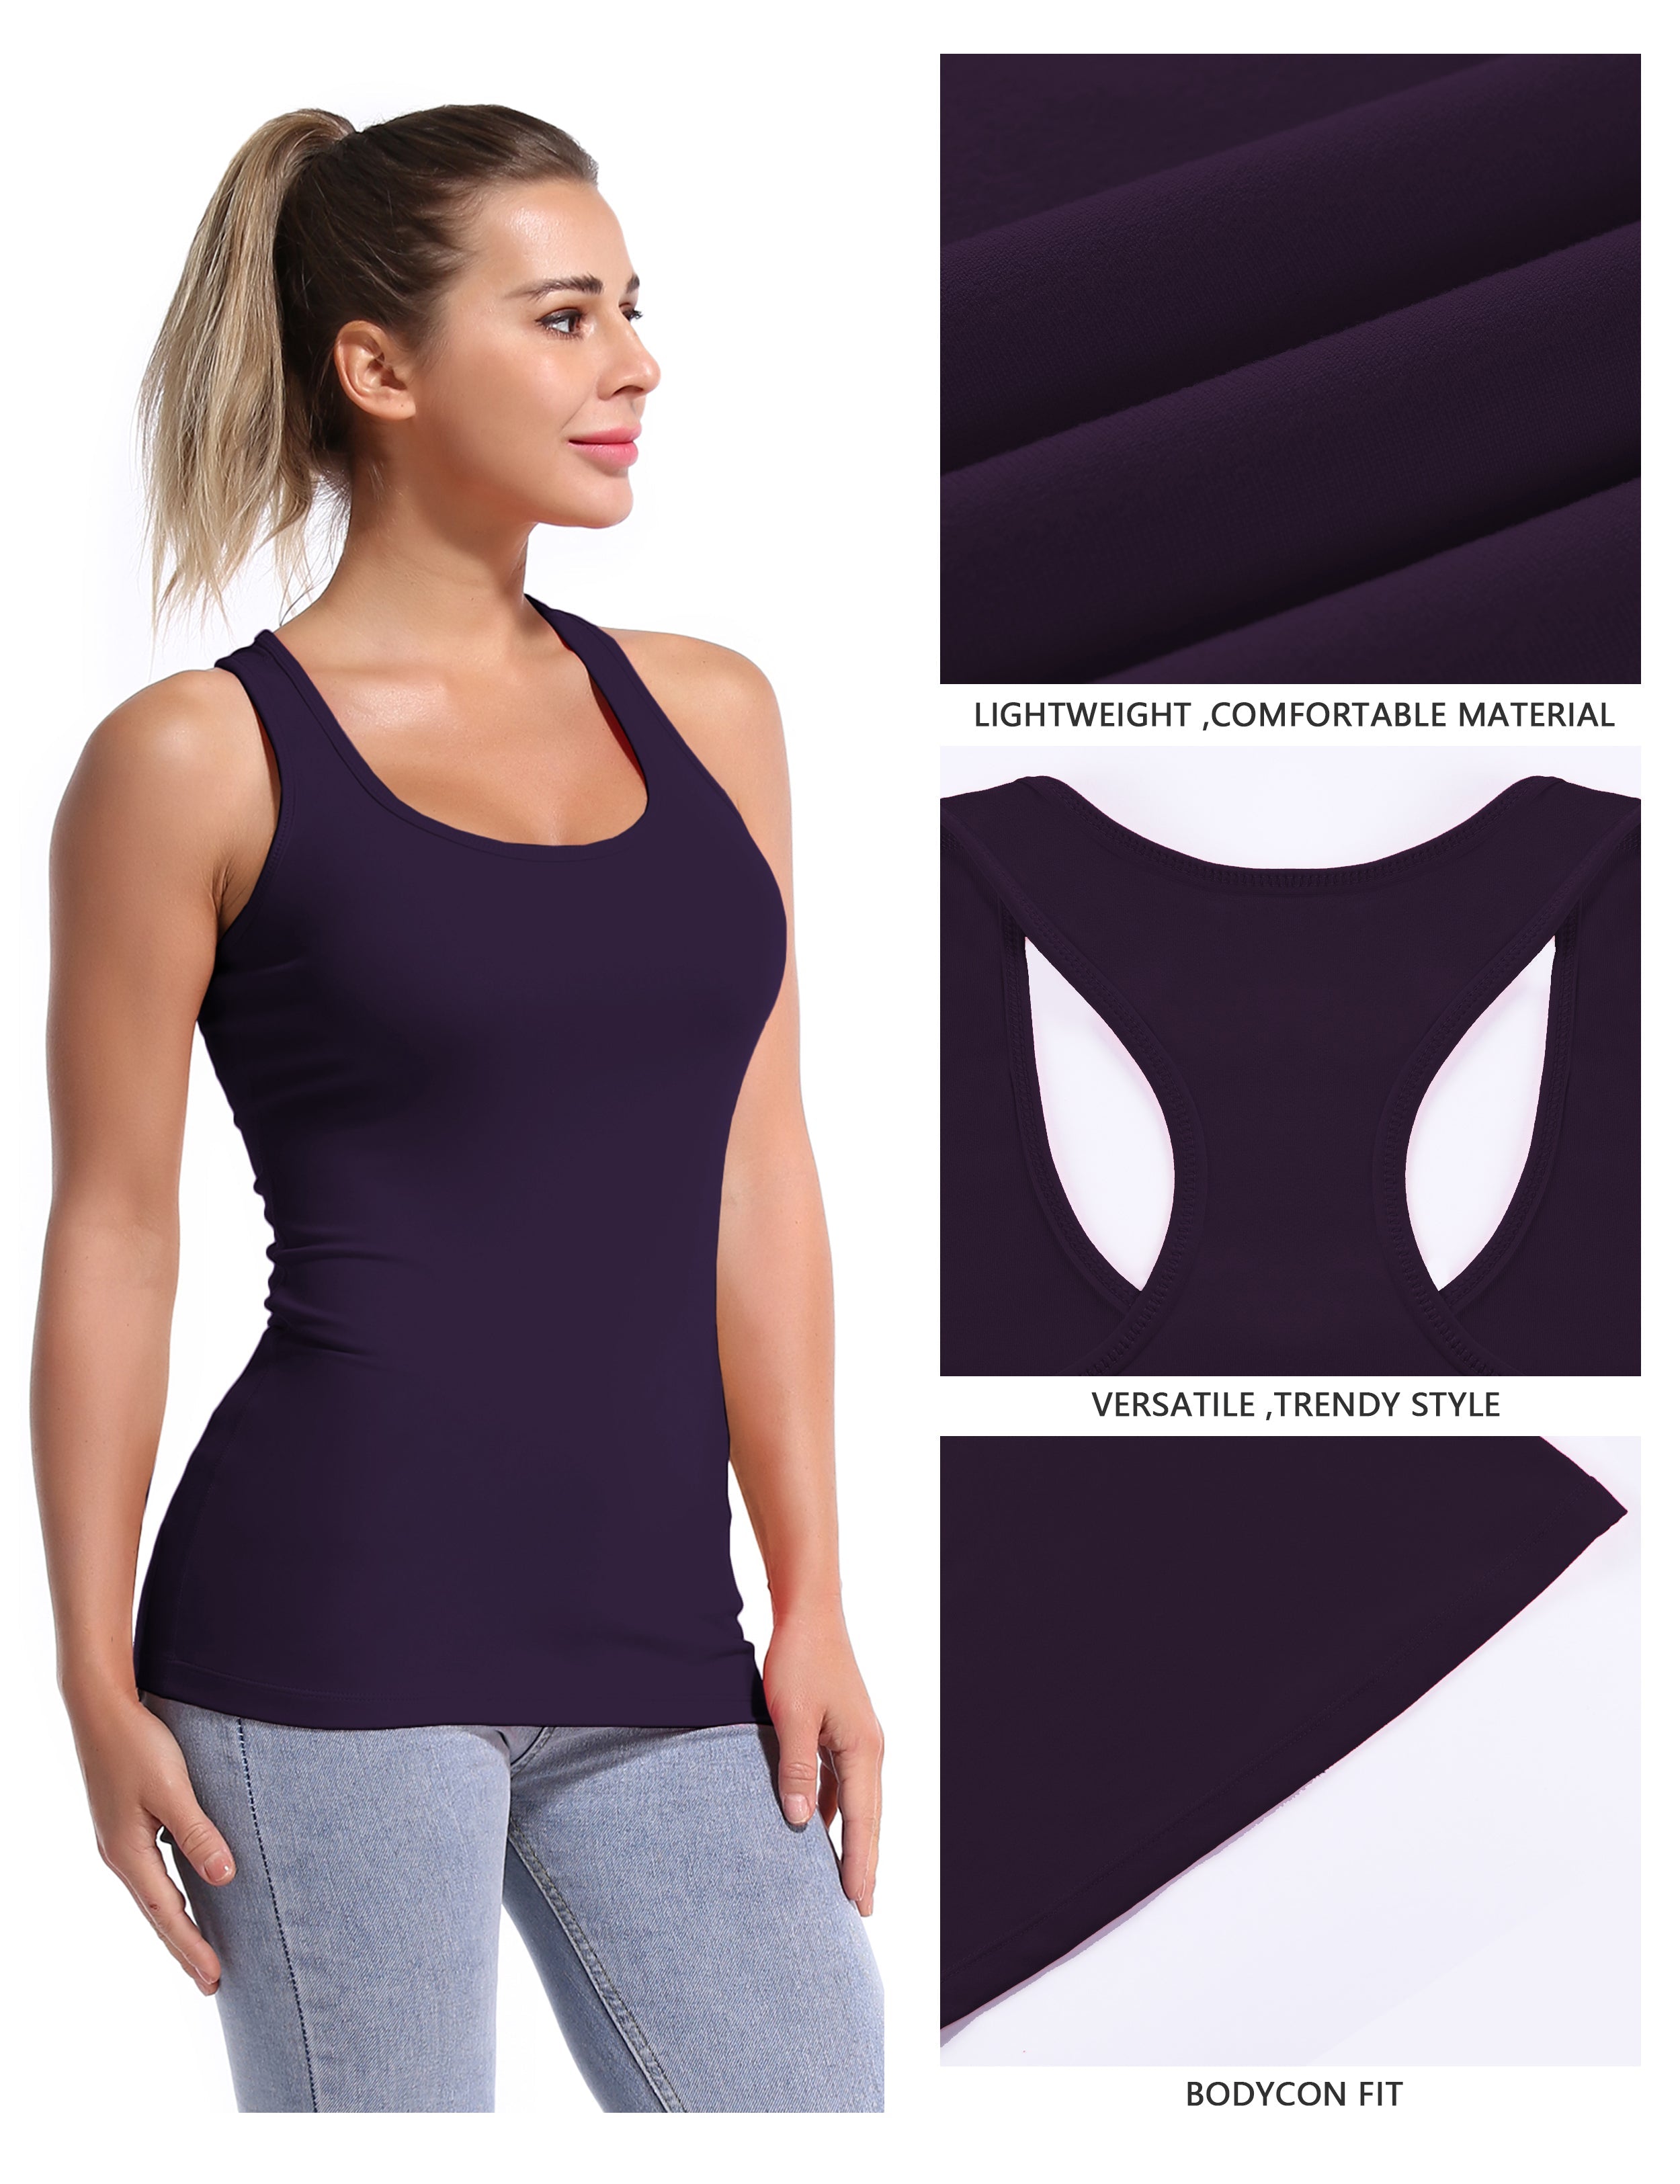 Racerback Athletic Tank Tops midnightblue 92%Nylon/8%Spandex(Cotton Soft) Designed for Tall Size Tight Fit So buttery soft, it feels weightless Sweat-wicking Four-way stretch Breathable Contours your body Sits below the waistband for moderate, everyday coverage